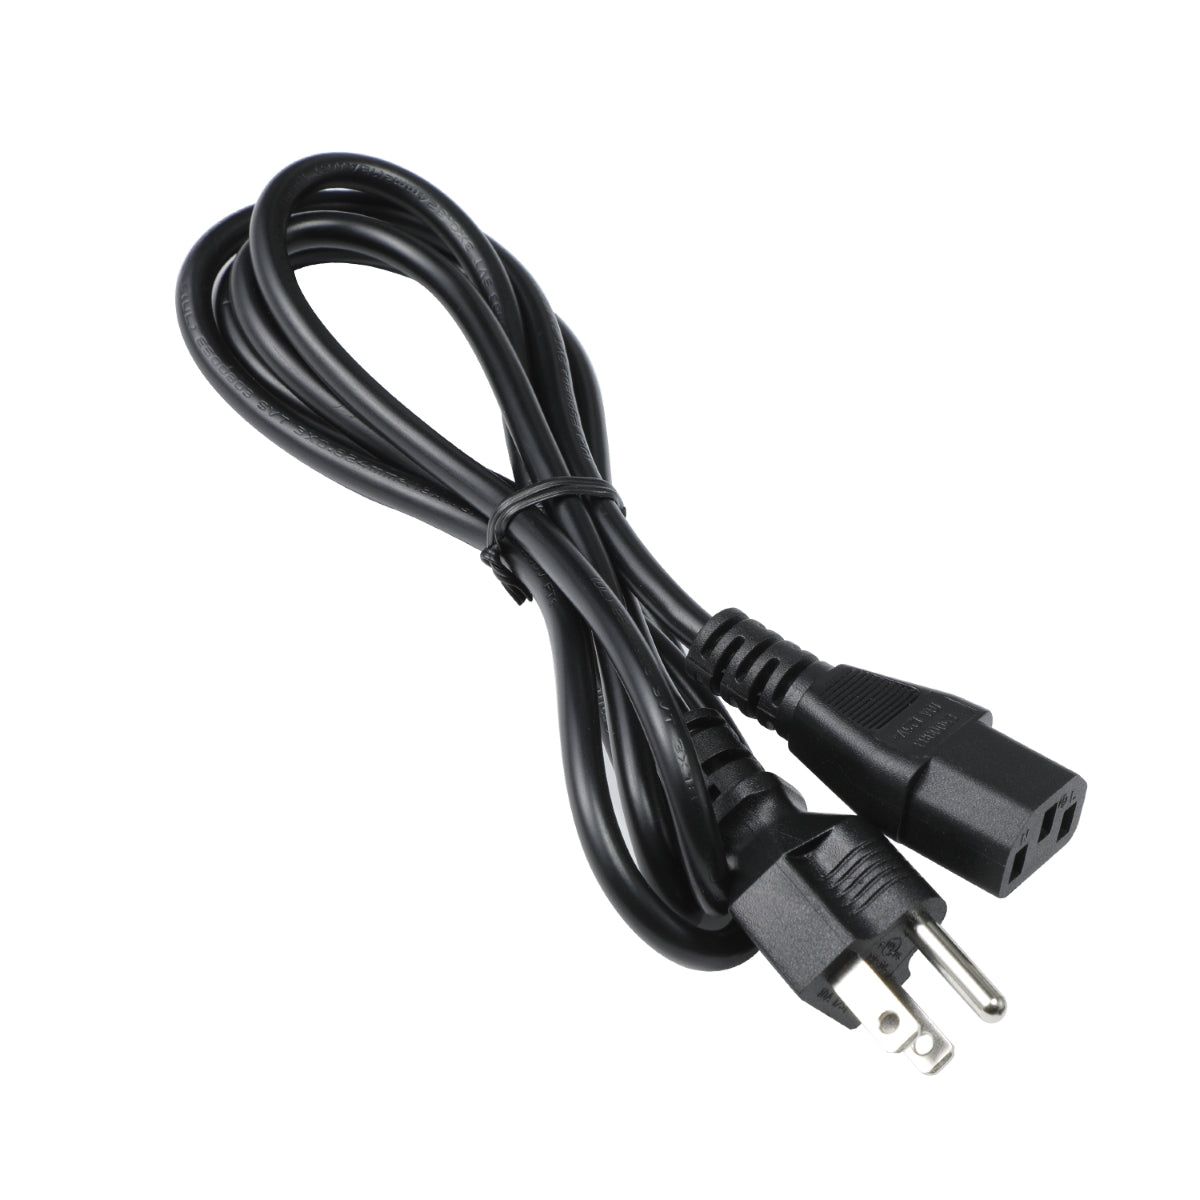 Power Cord for LG 40WP95C-W Monitor TV